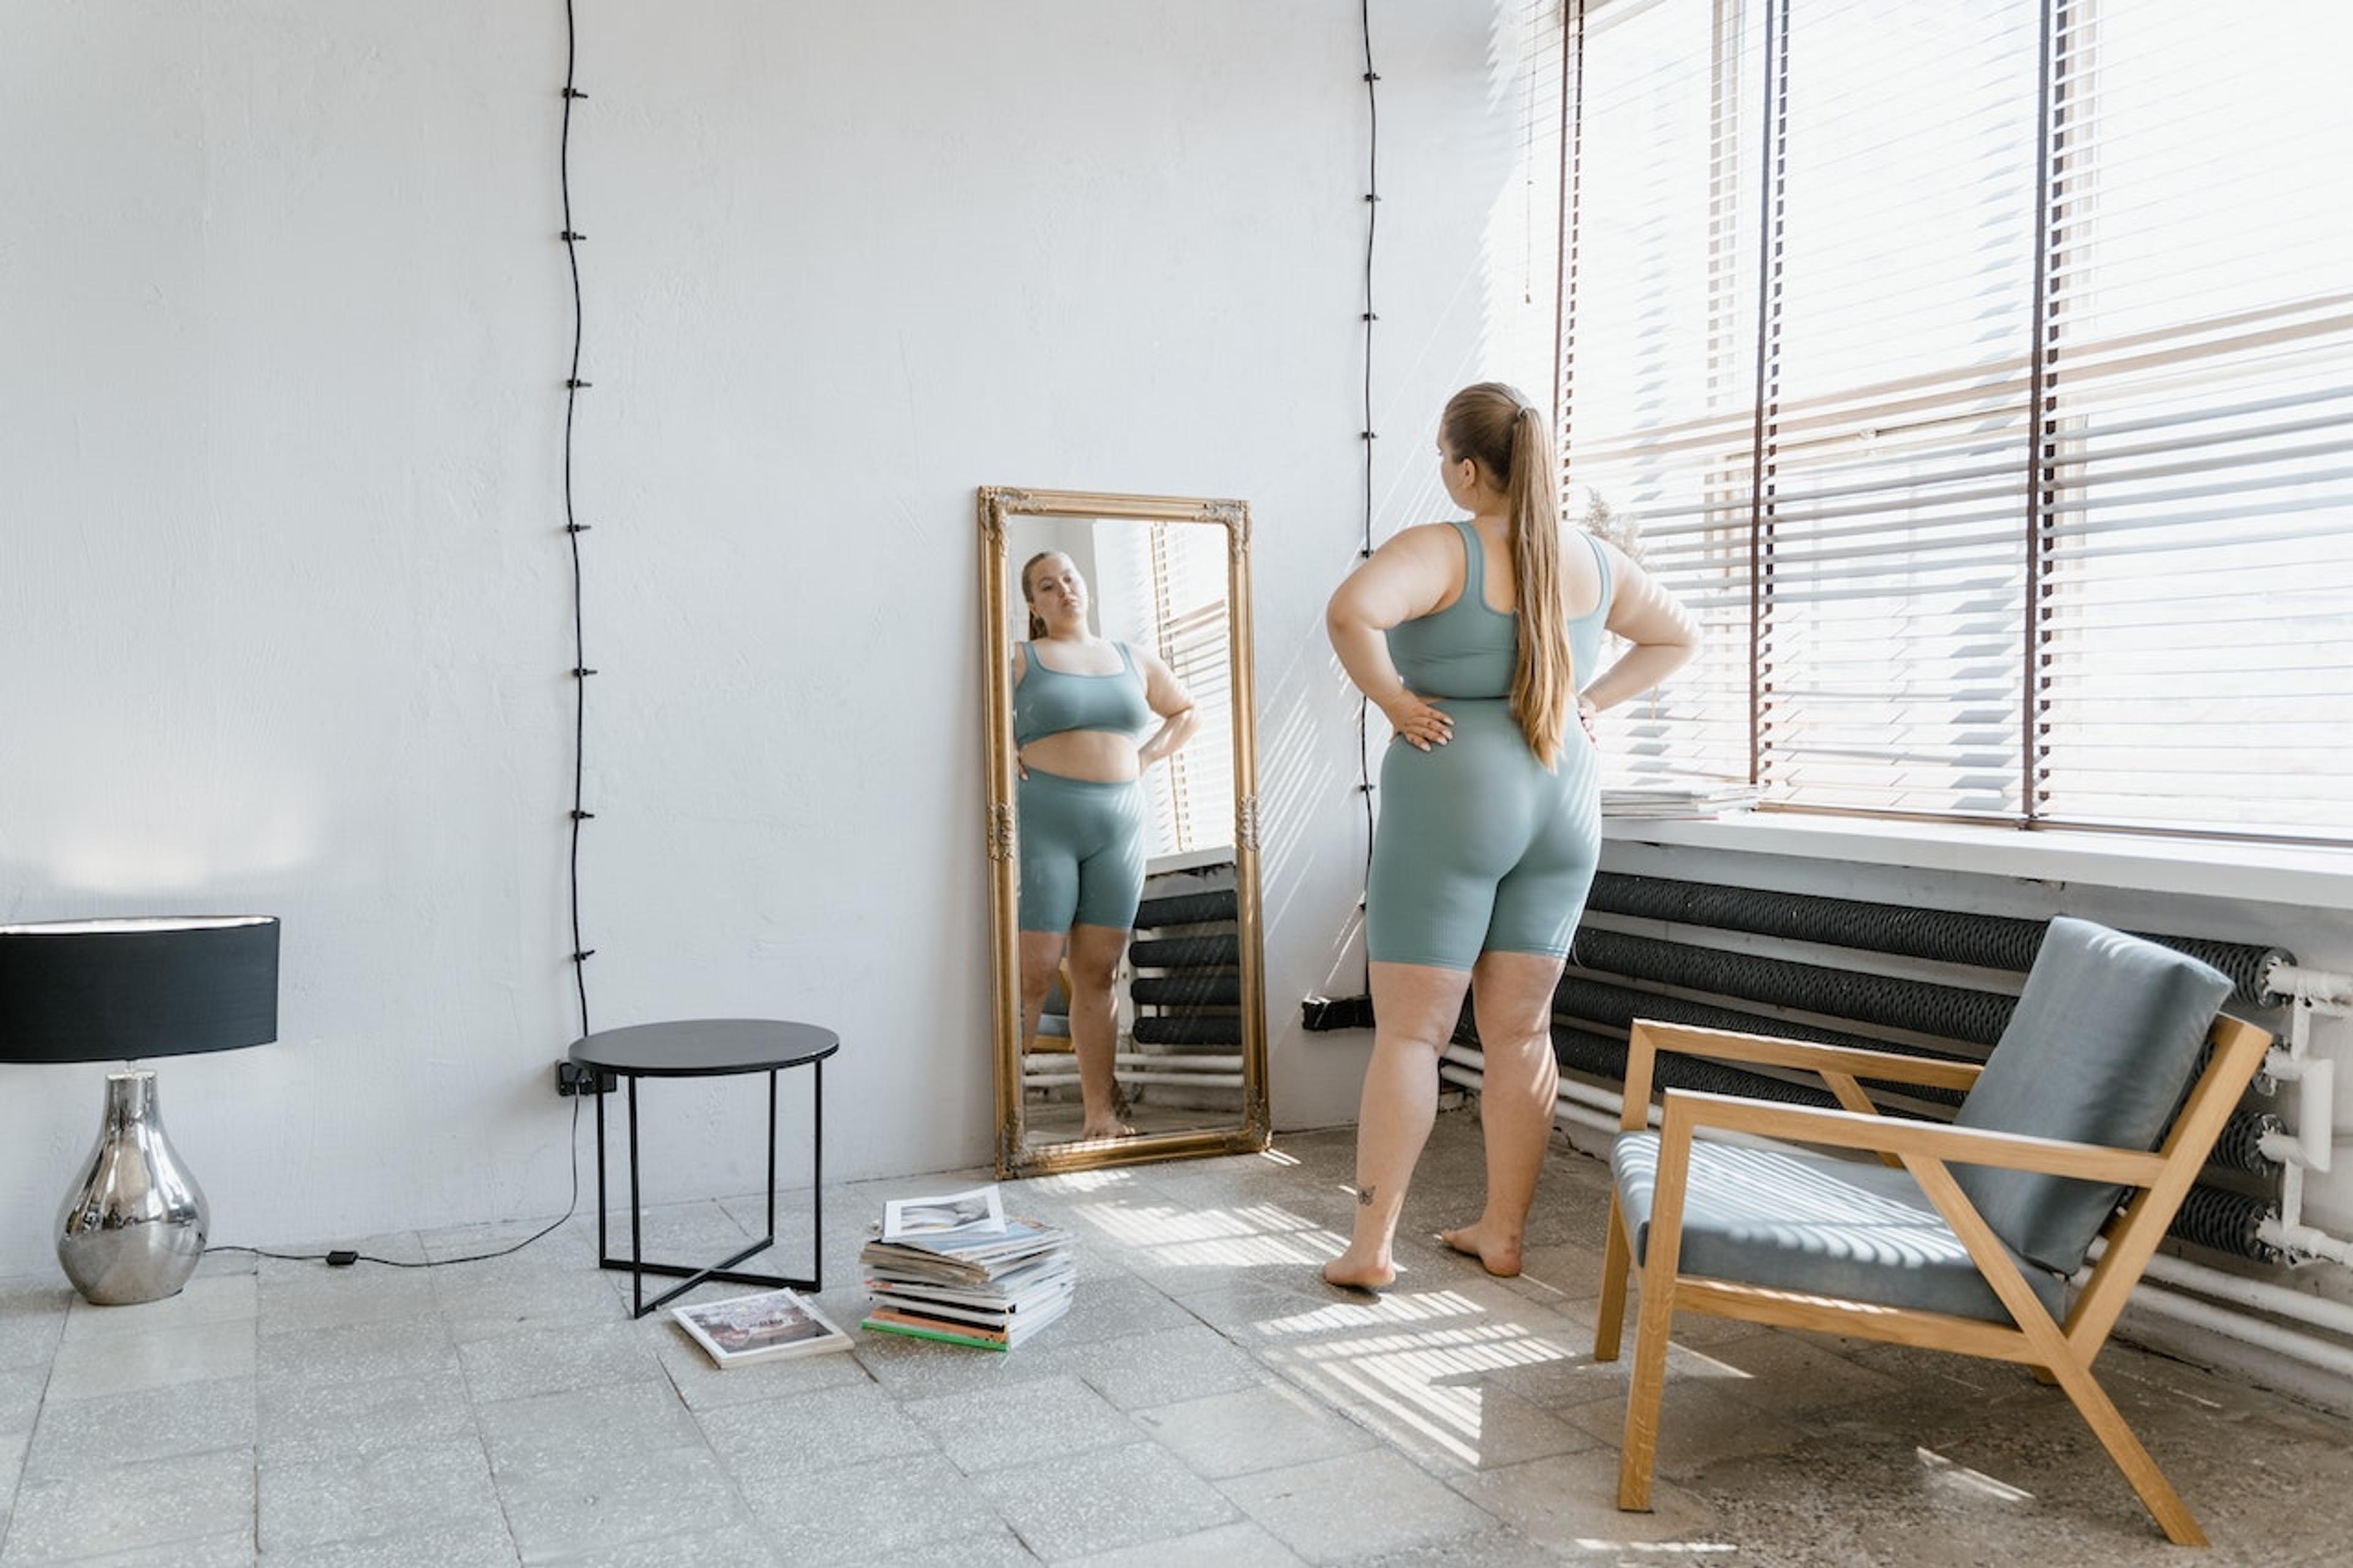 A woman in a larger body wearing matching sports bra and bike shorts looks at herself in the mirror